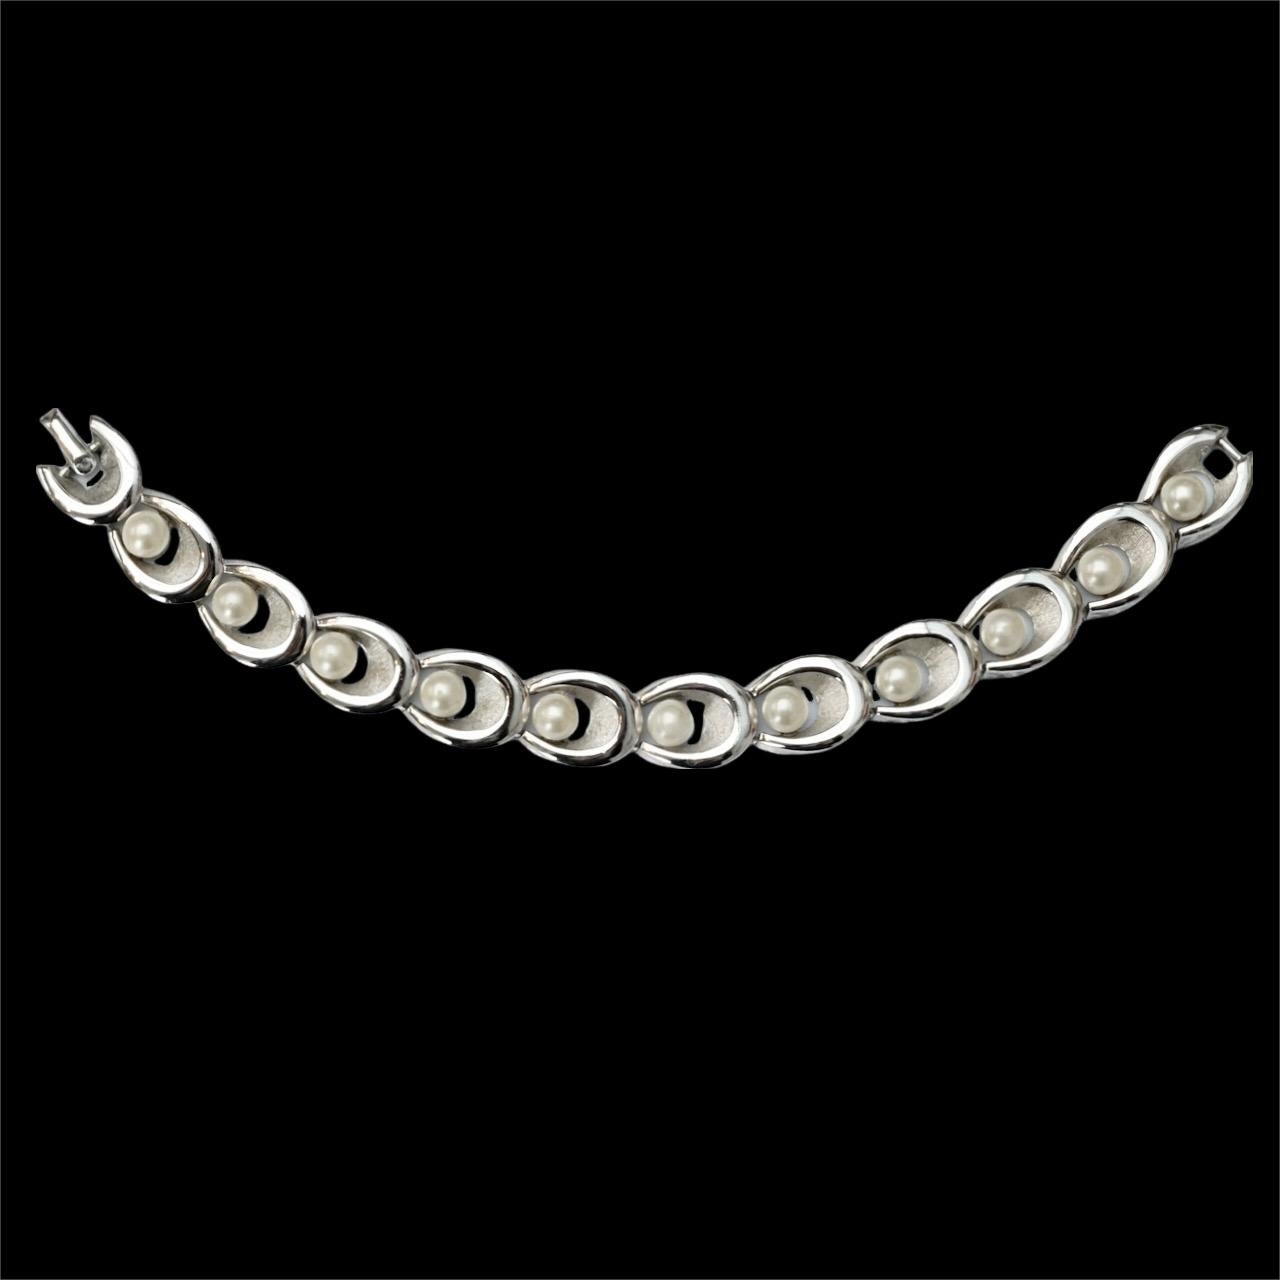 Trifari Silver Plated Brushed and Shiny Bracelet with Faux Pearls circa 1960s For Sale 5